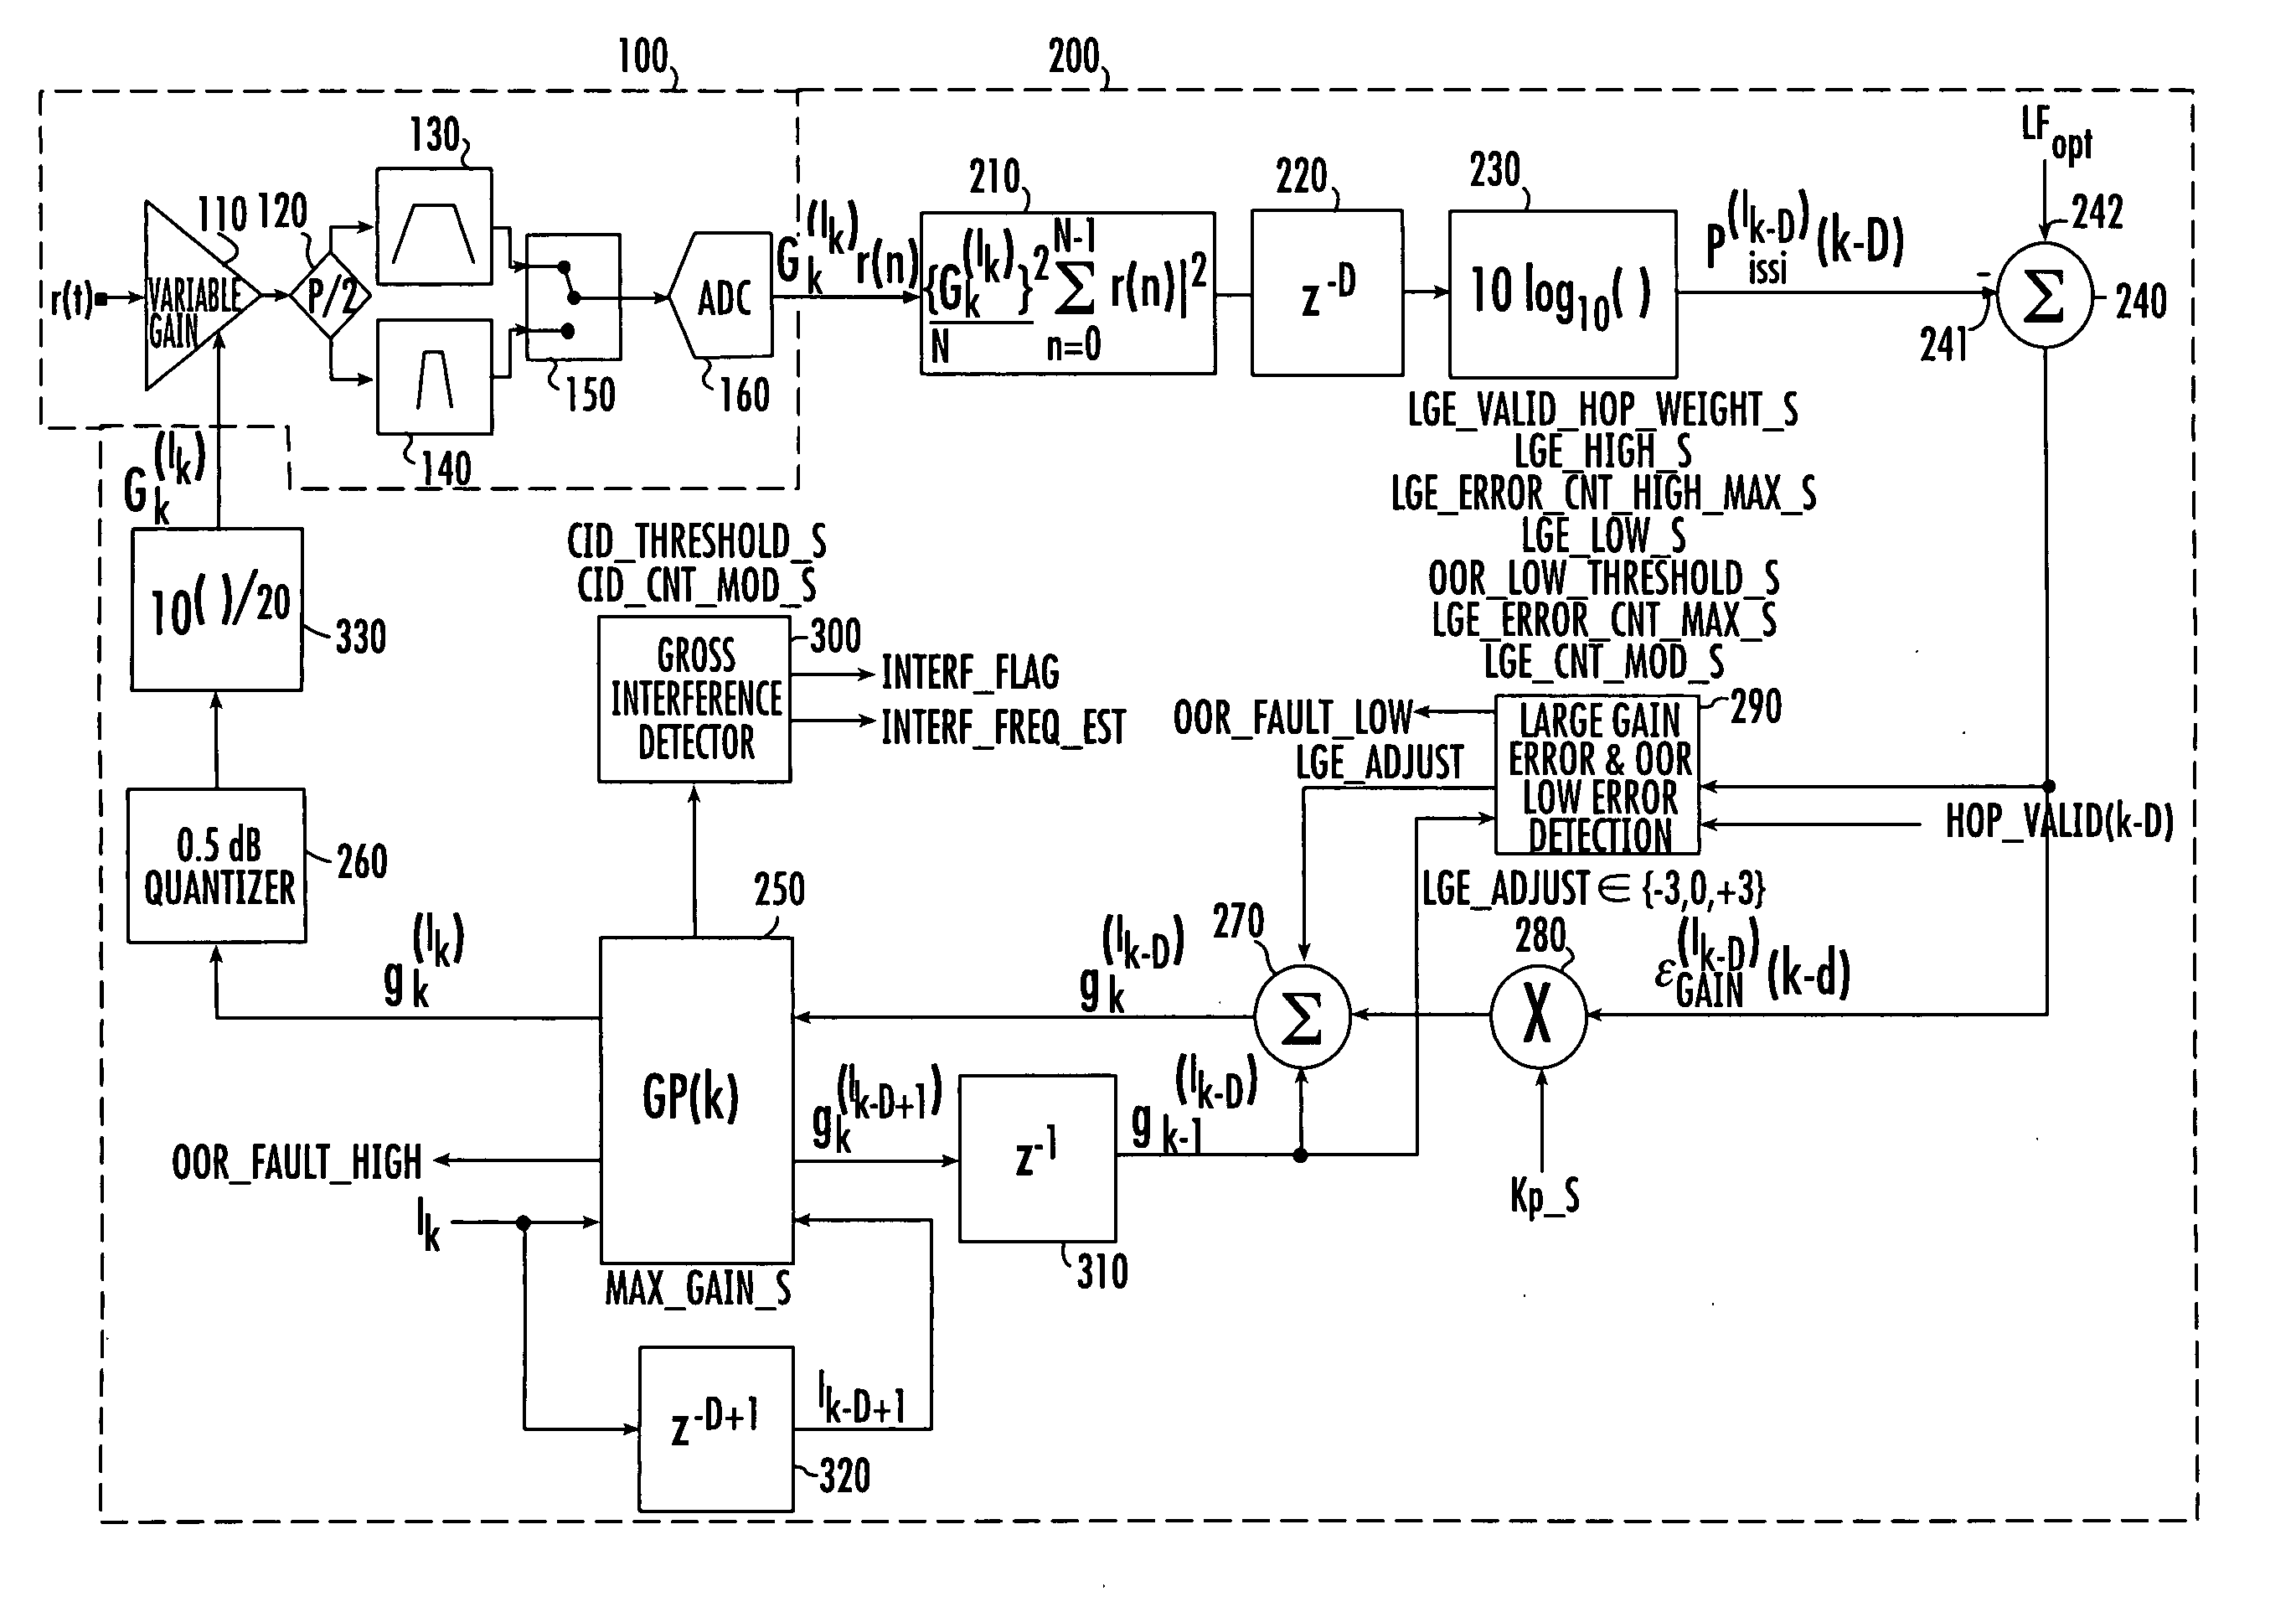 Frequency selective automatic gain control with dual non-symmetric attack and release times and interference detection feature